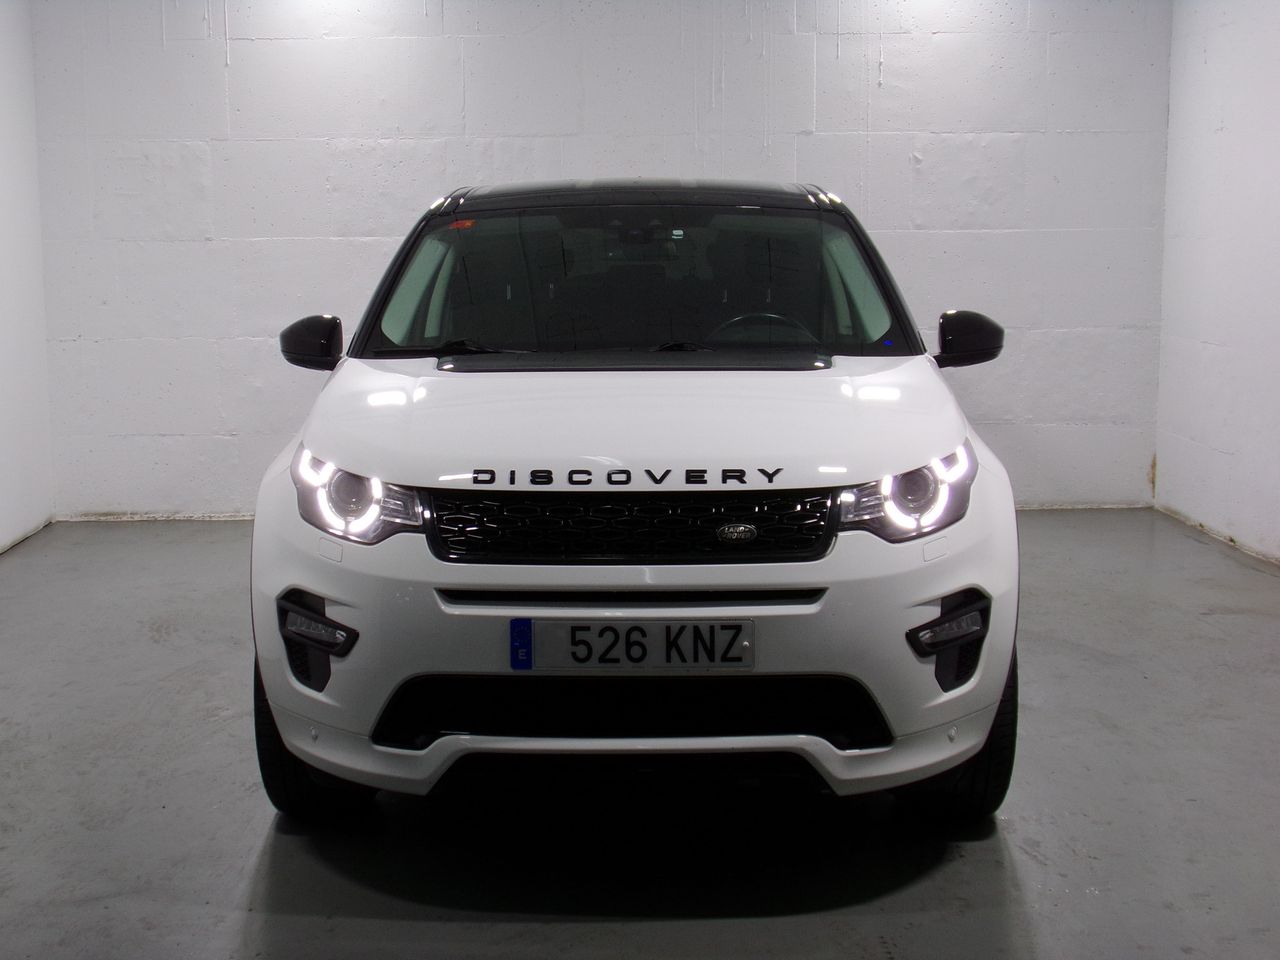 Foto Land-Rover Discovery Sport 5